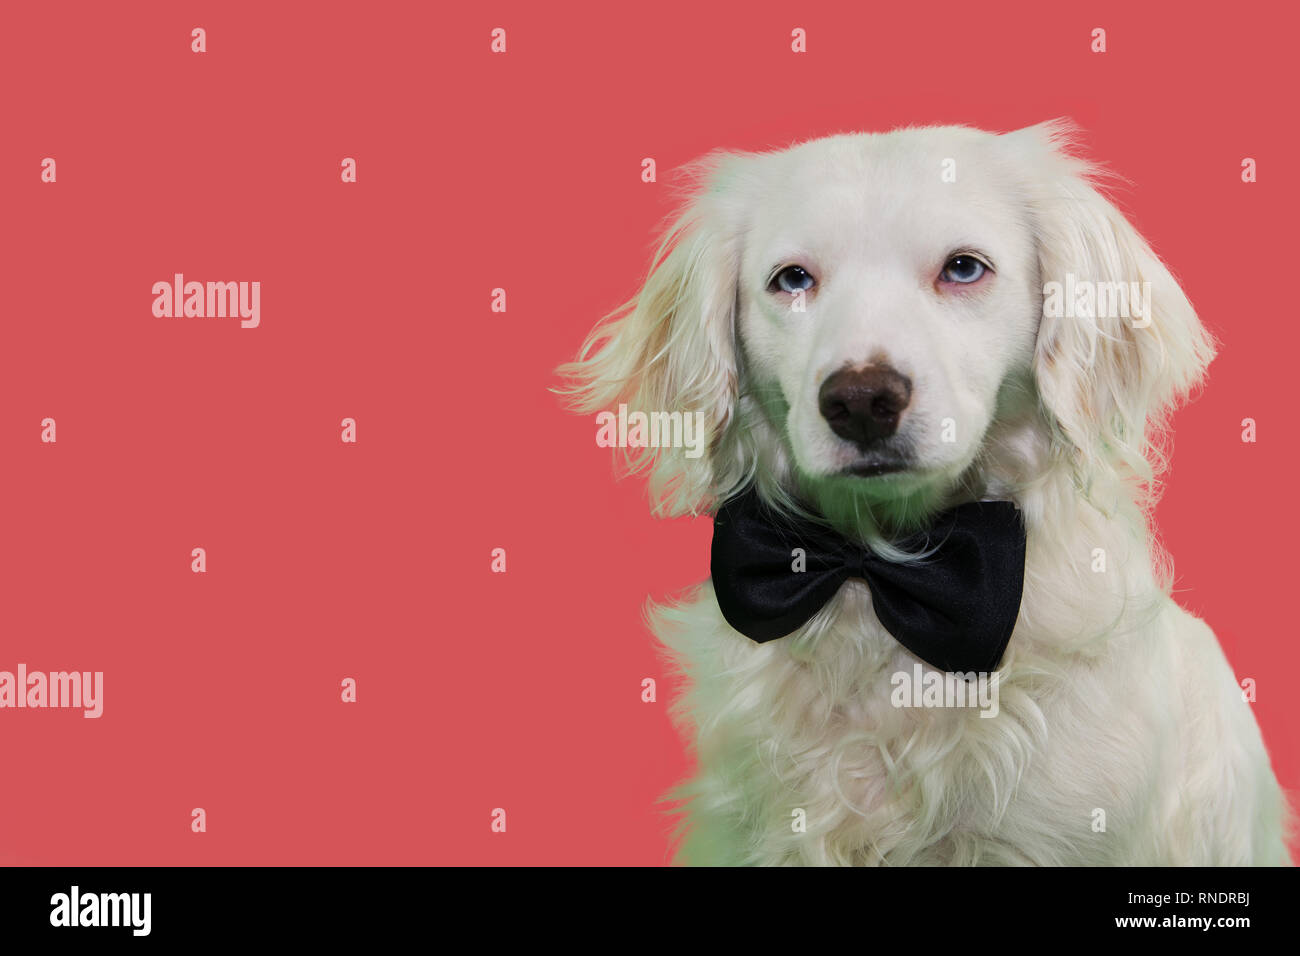 ELEGANT DOG WEARING A BLACK BOWTIE WITH BLUE COLORED EYES. ISOLATED STUDIO SHOT ON LIVING CORAL BACKGROUND. Stock Photo